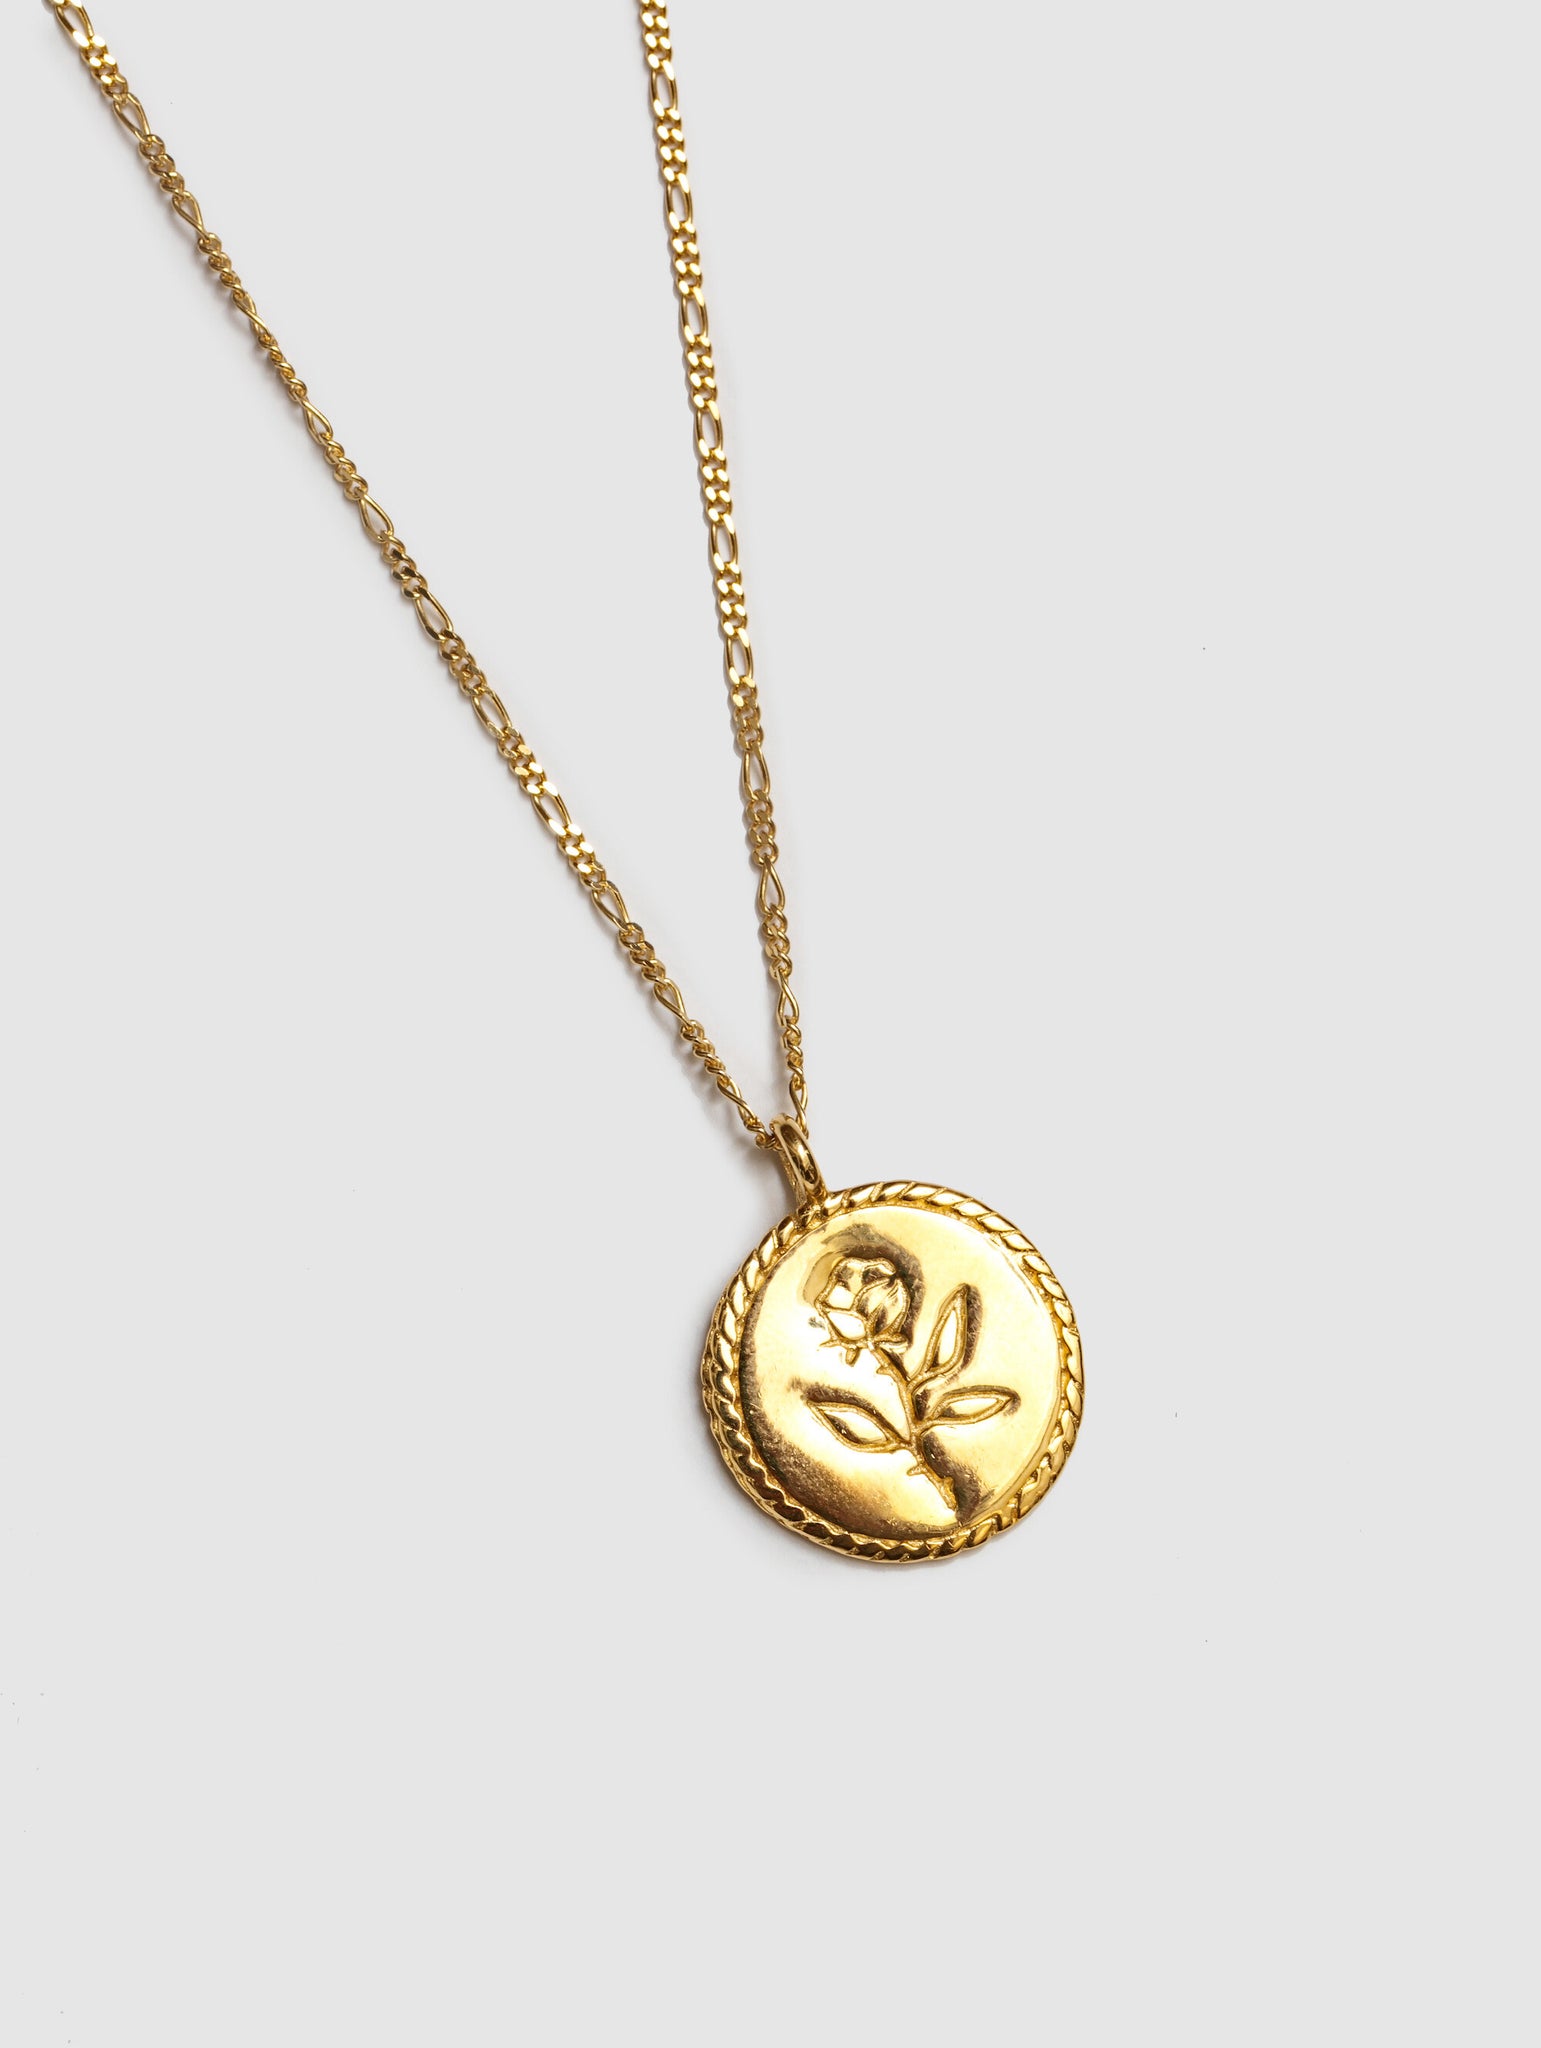 Rose Coin Necklace in Gold